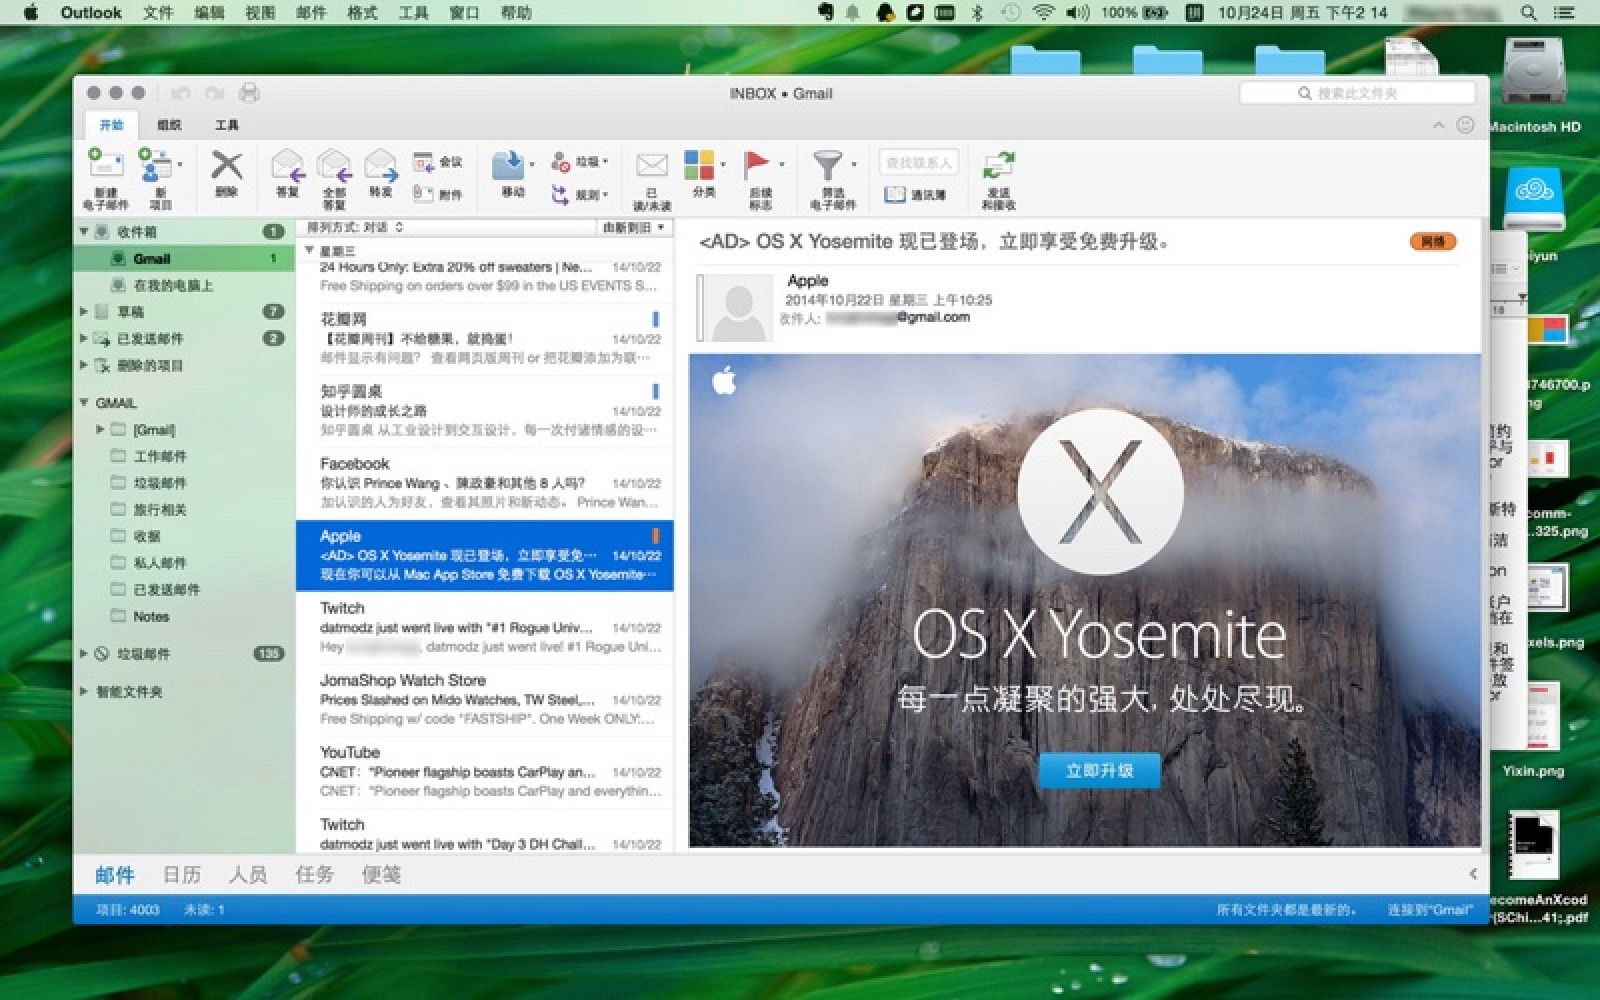 microsoft office 2016 for mac pc torrent